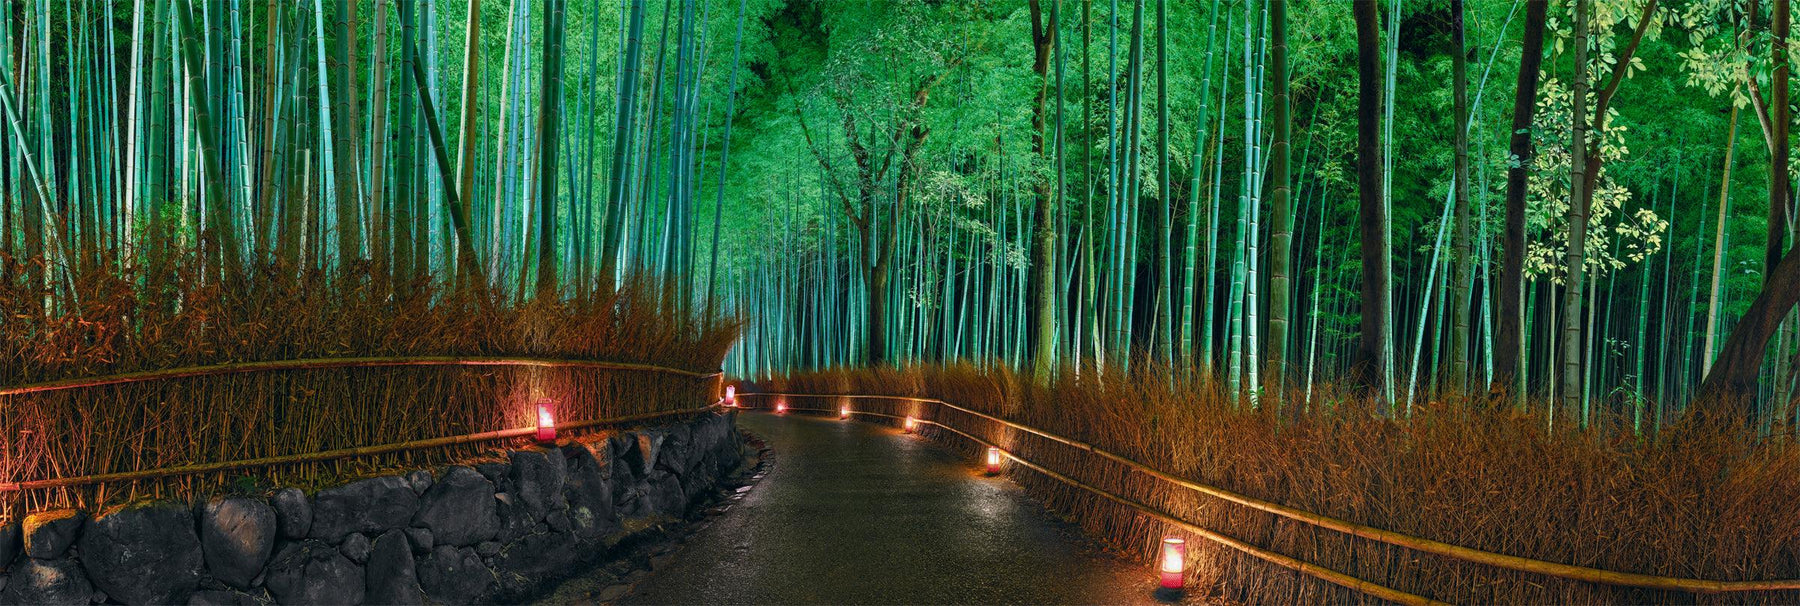 Path lined by a yellow grass fence leading through a green bamboo forest lit up at night by lanterns in Kyoto Japan